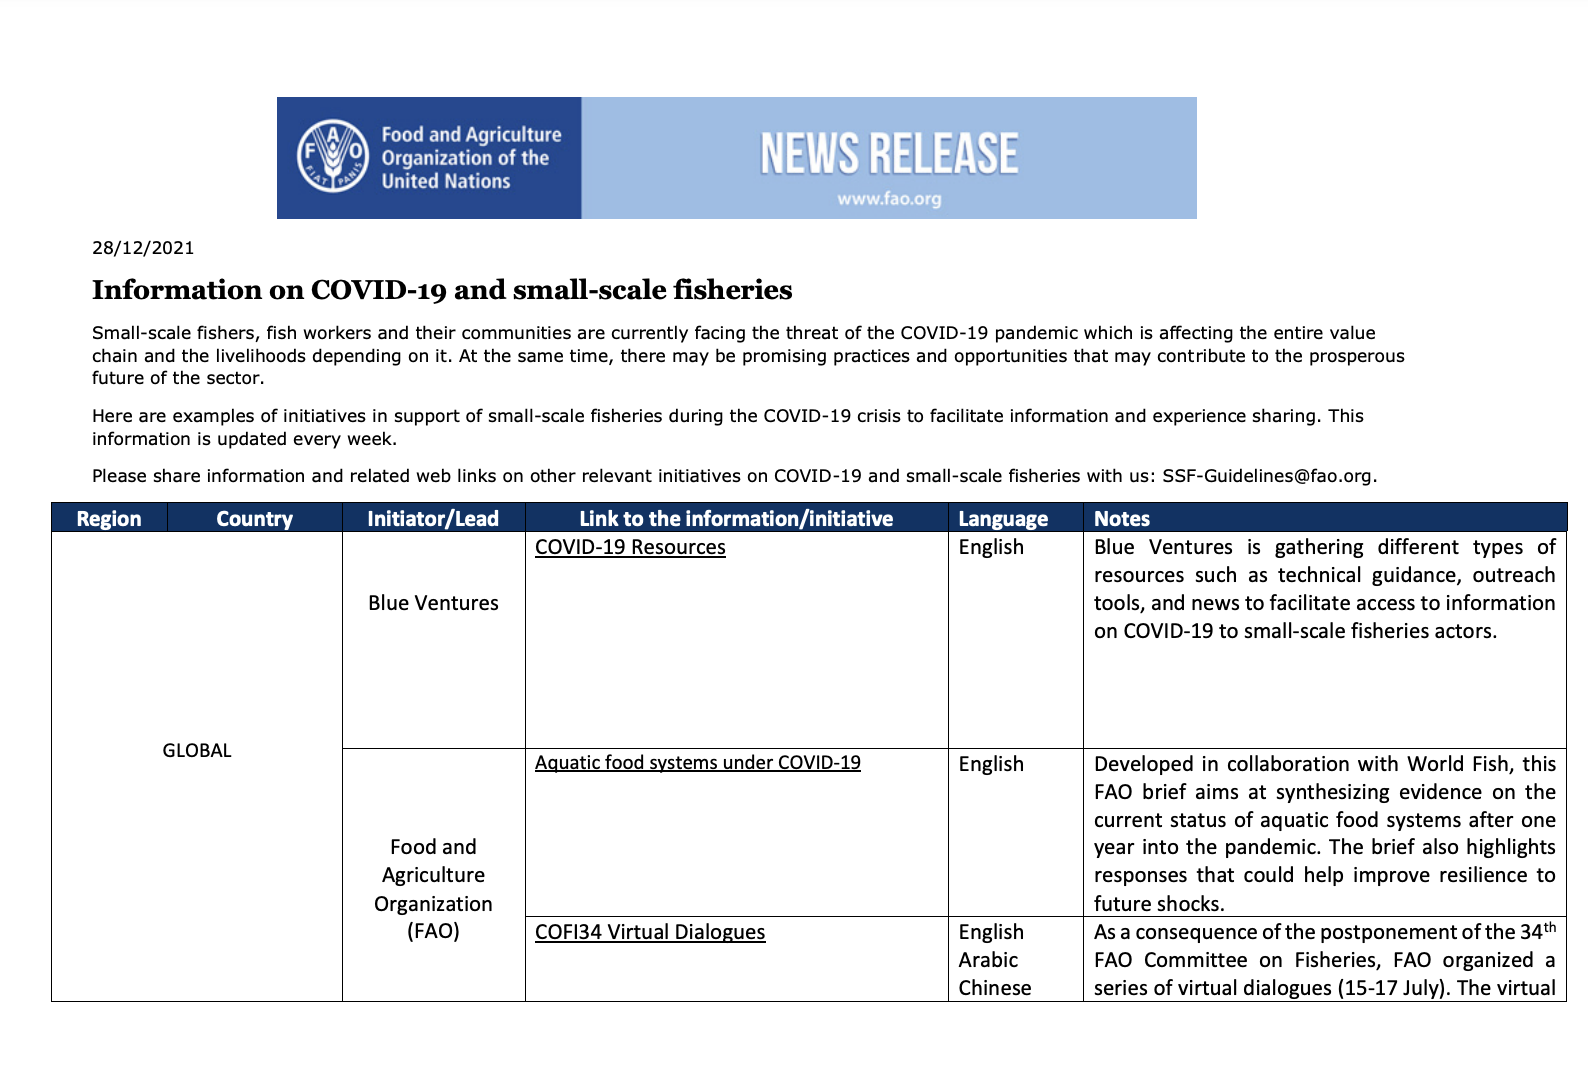 News Release: Information on COVID-19 and small-scale fisheries